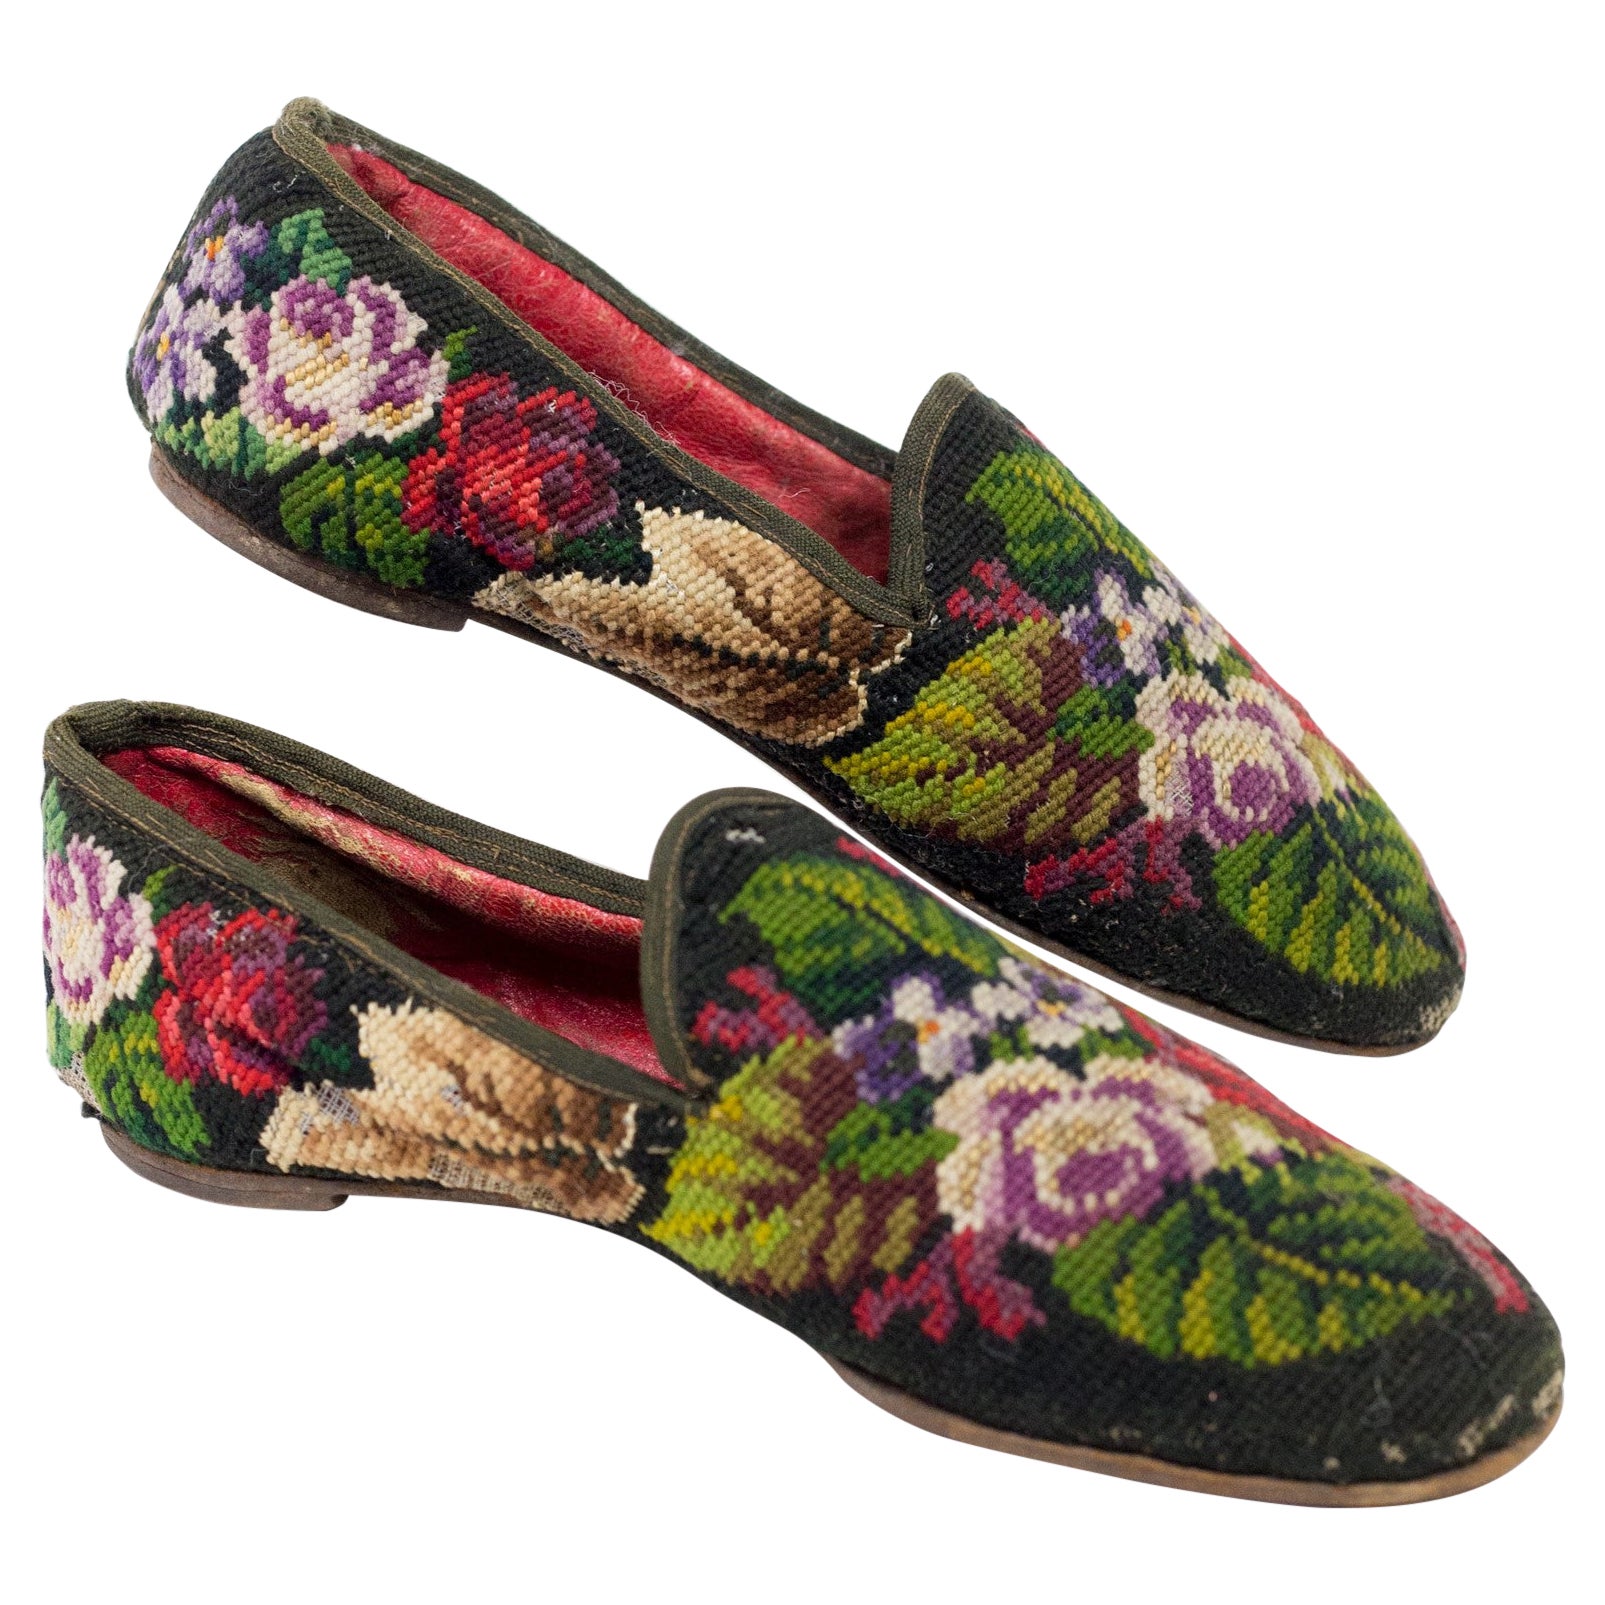 Pair of men's slippers in stitch point tapestry - France Circa 1860